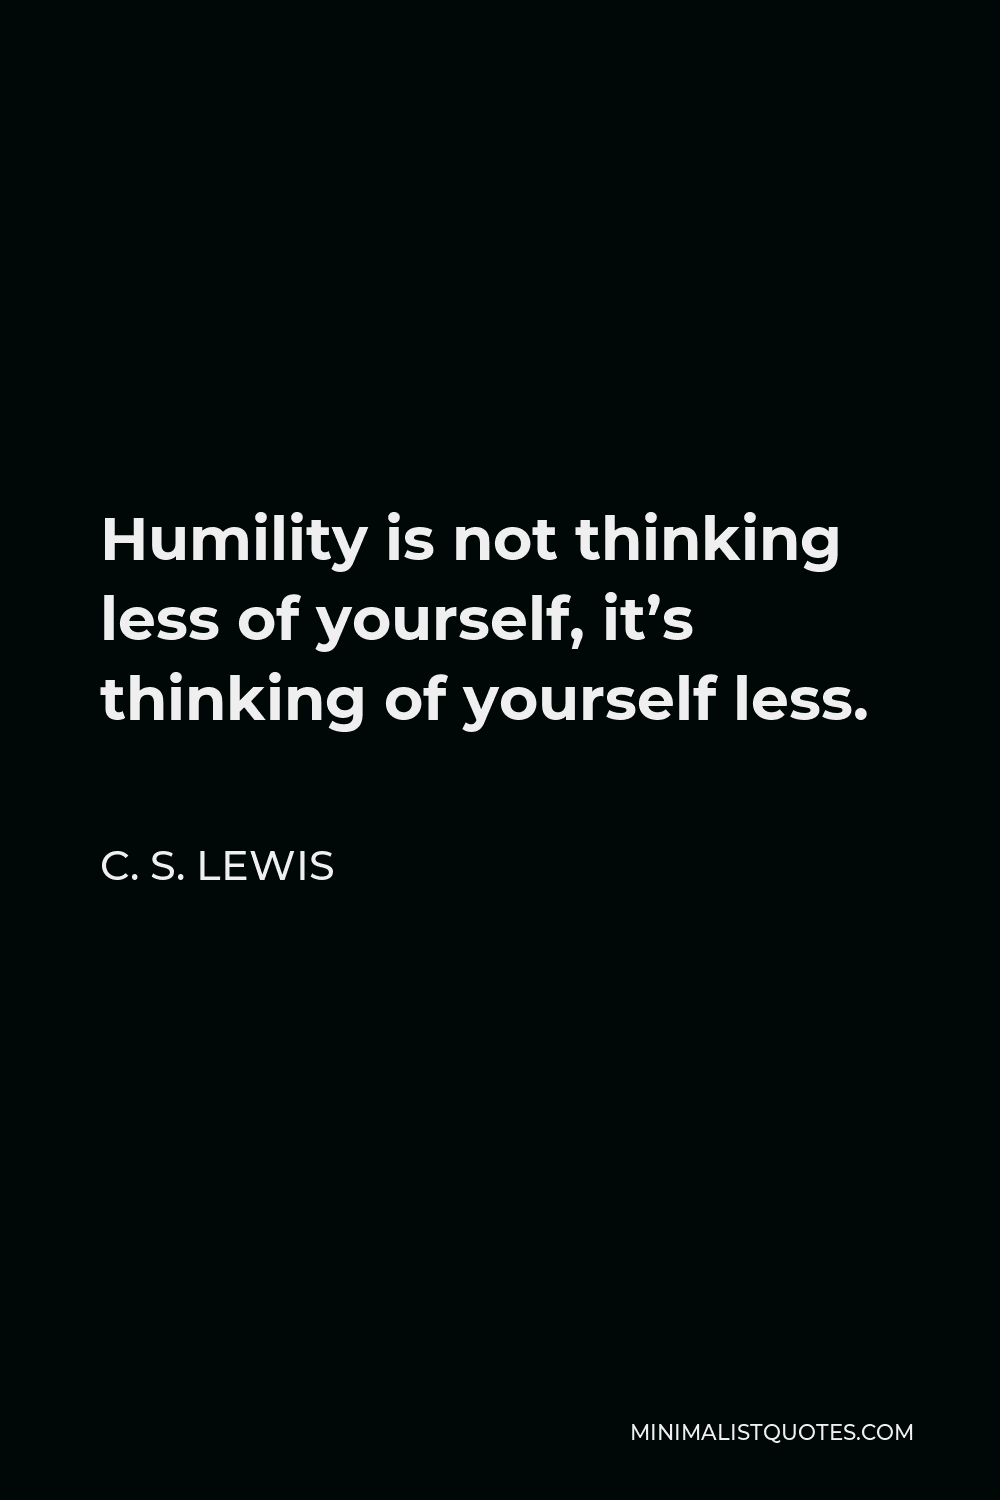 C. S. Lewis Quote - Humility is not thinking less of yourself, it’s thinking of yourself less.